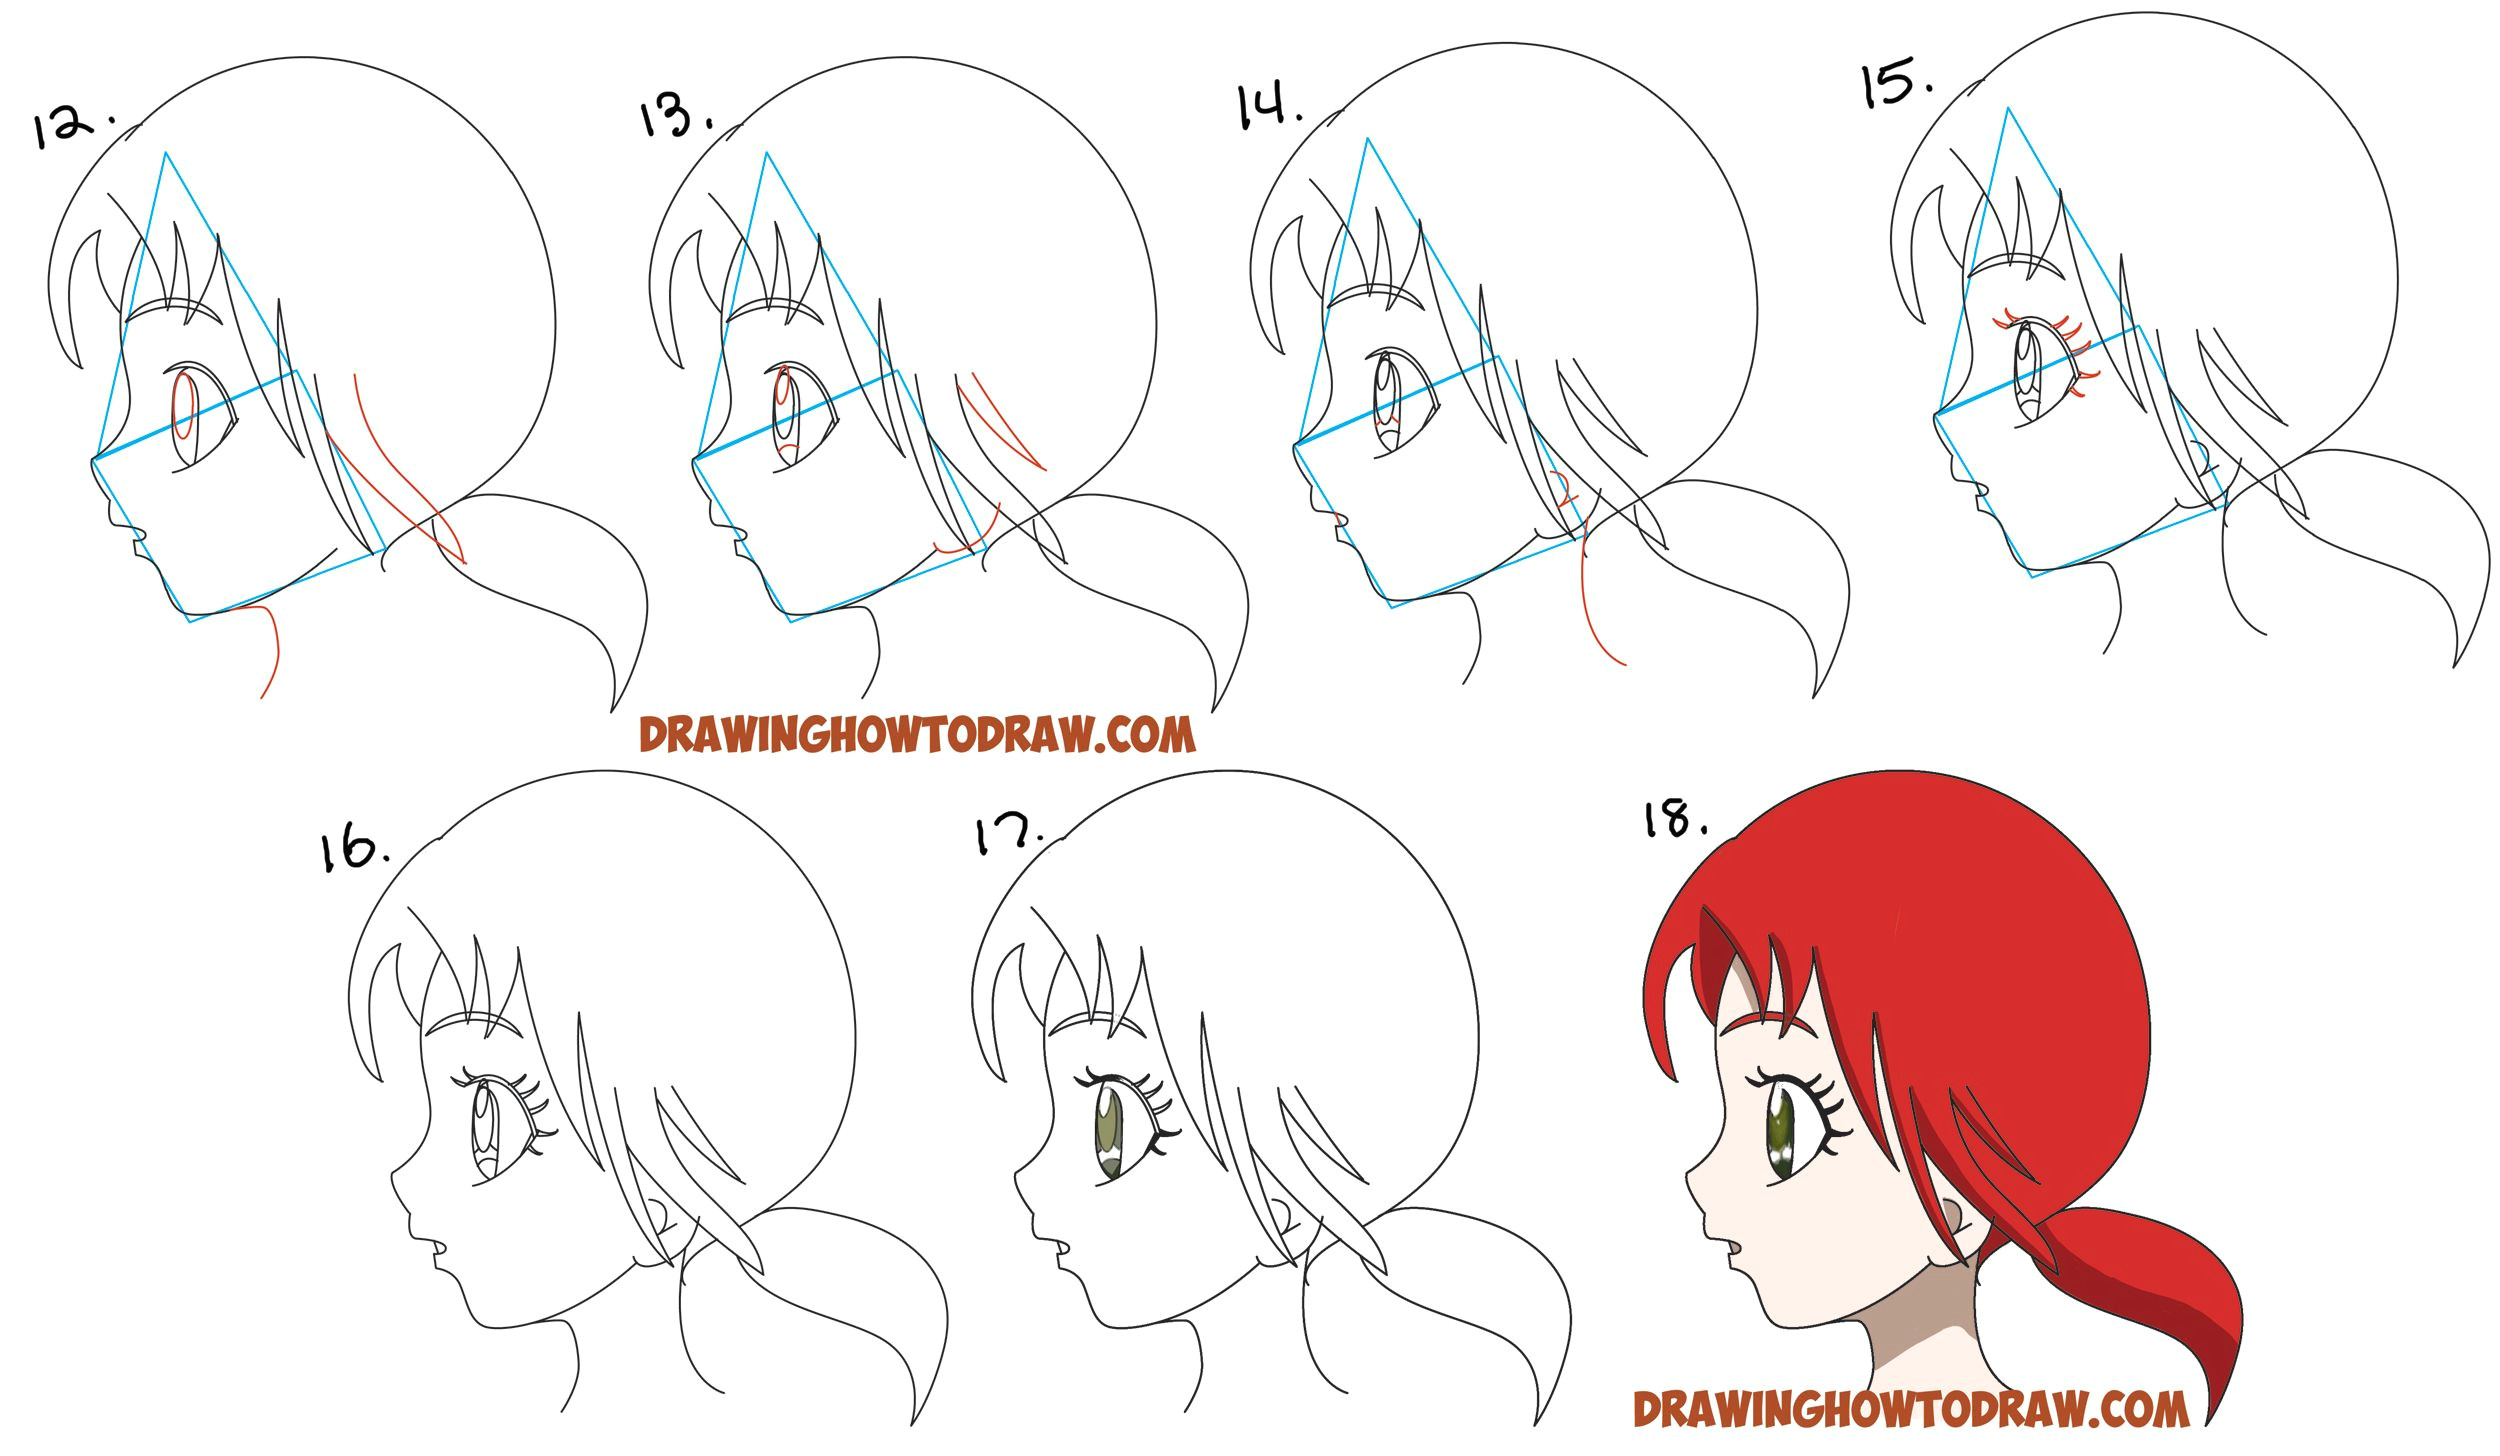 How to Draw Anime Head Step by Step How to Draw An Anime Manga Face and Eyes From the Side In